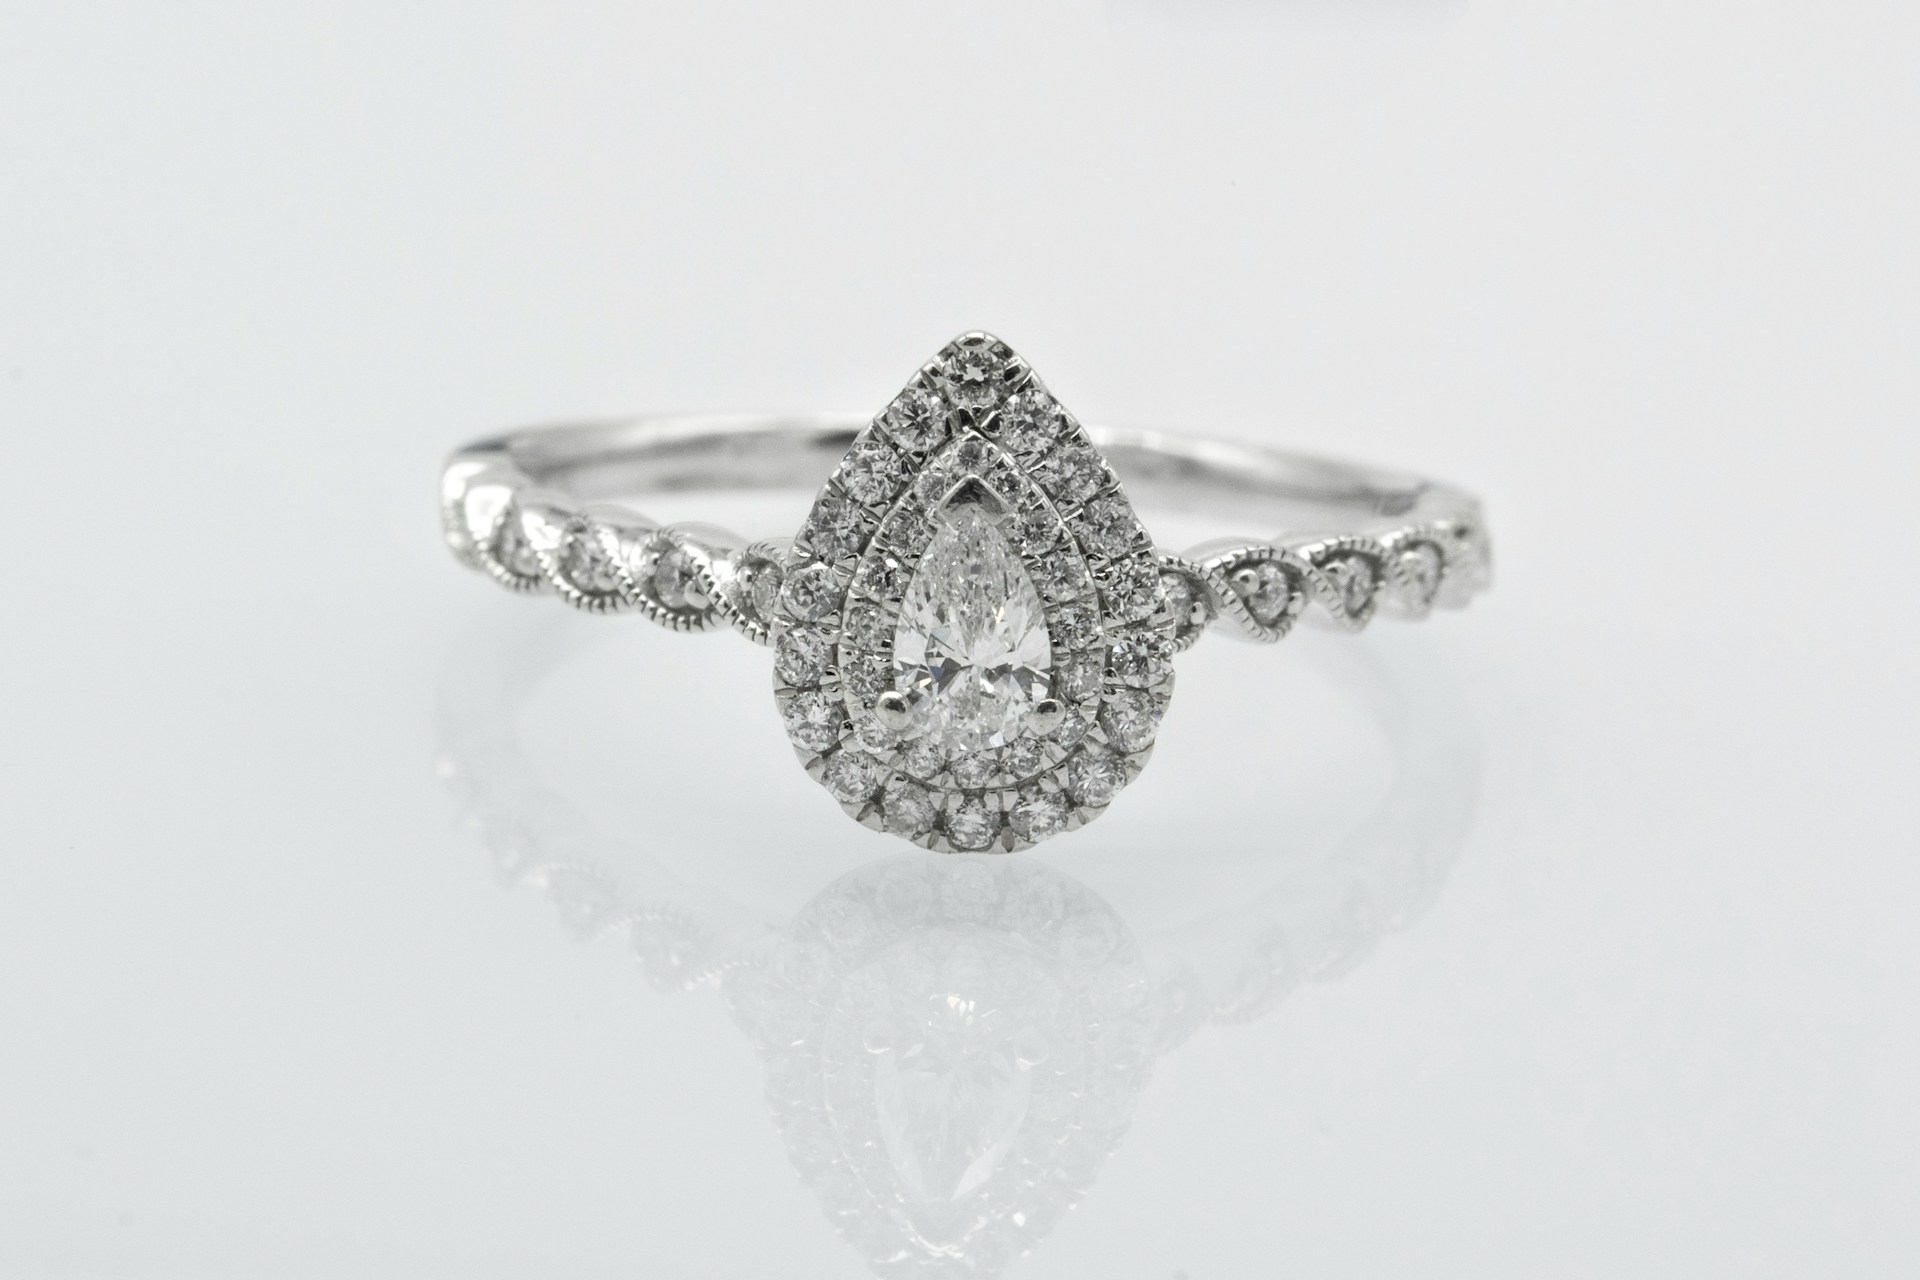 a white gold engagement ring featuring a pear shape diamond and diamond accents